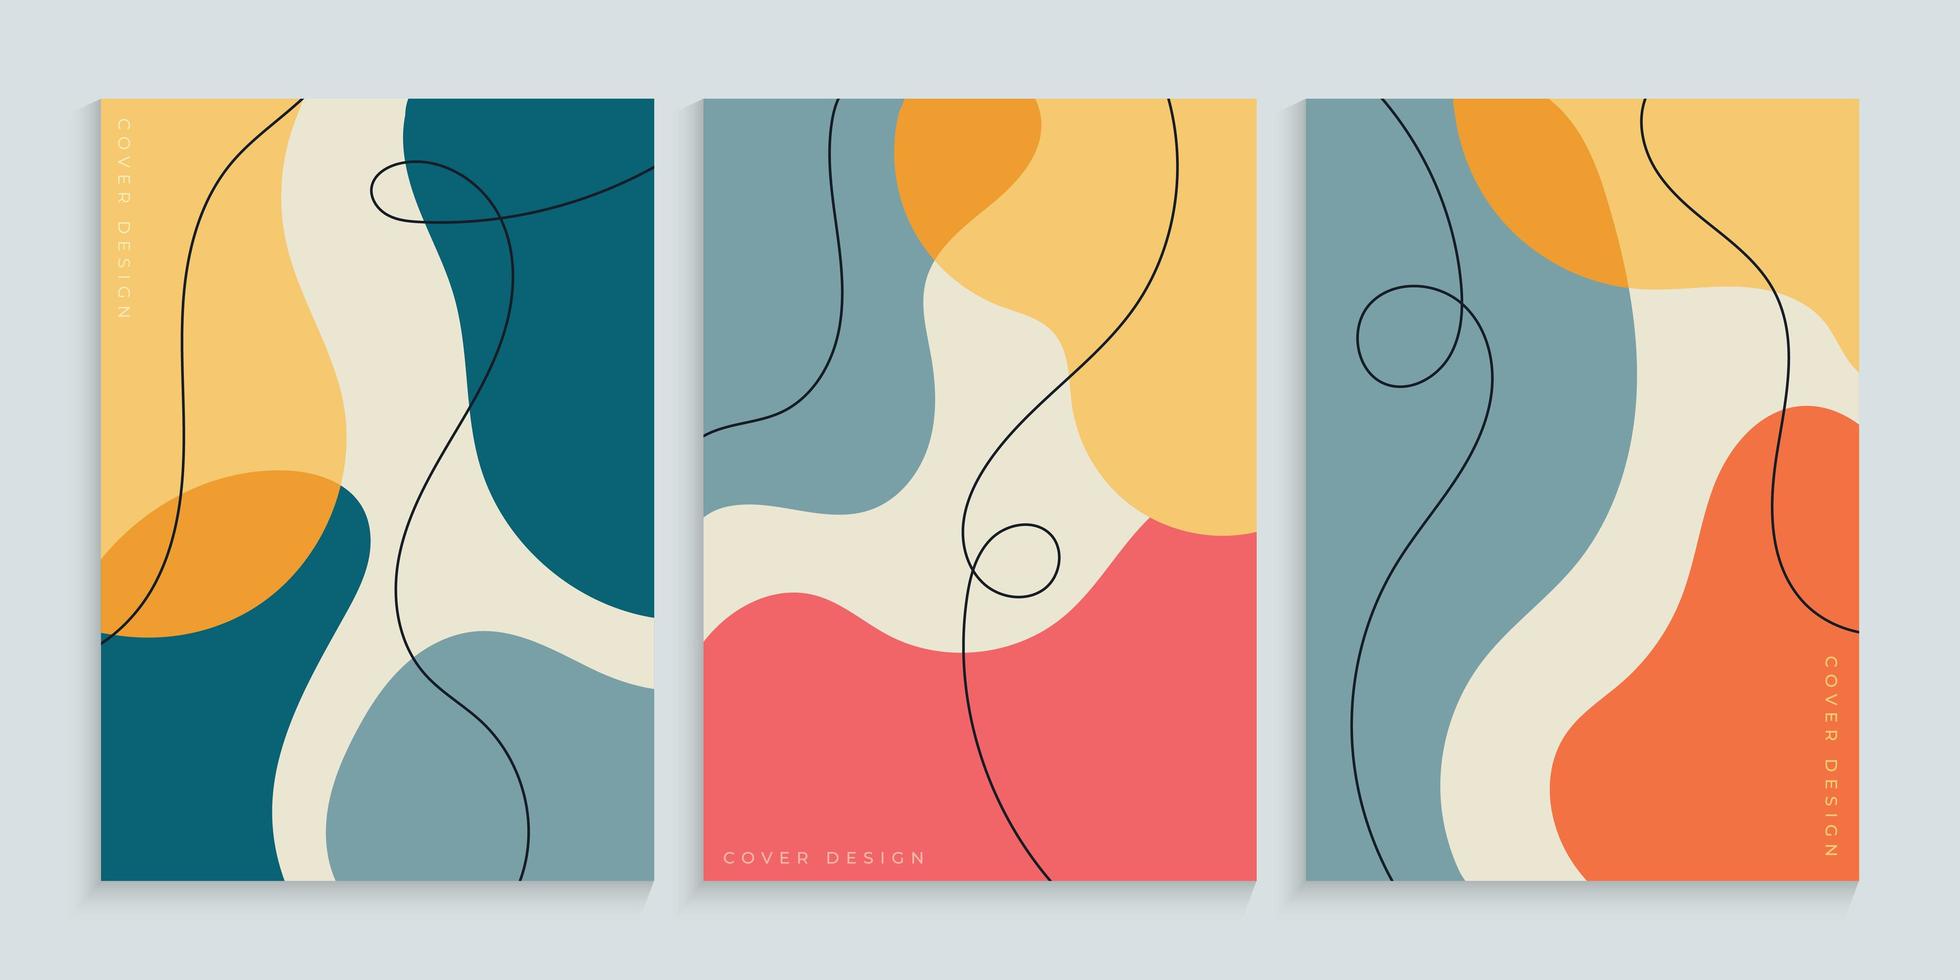 Freehand cover background collection with minimal colorful shapes vector